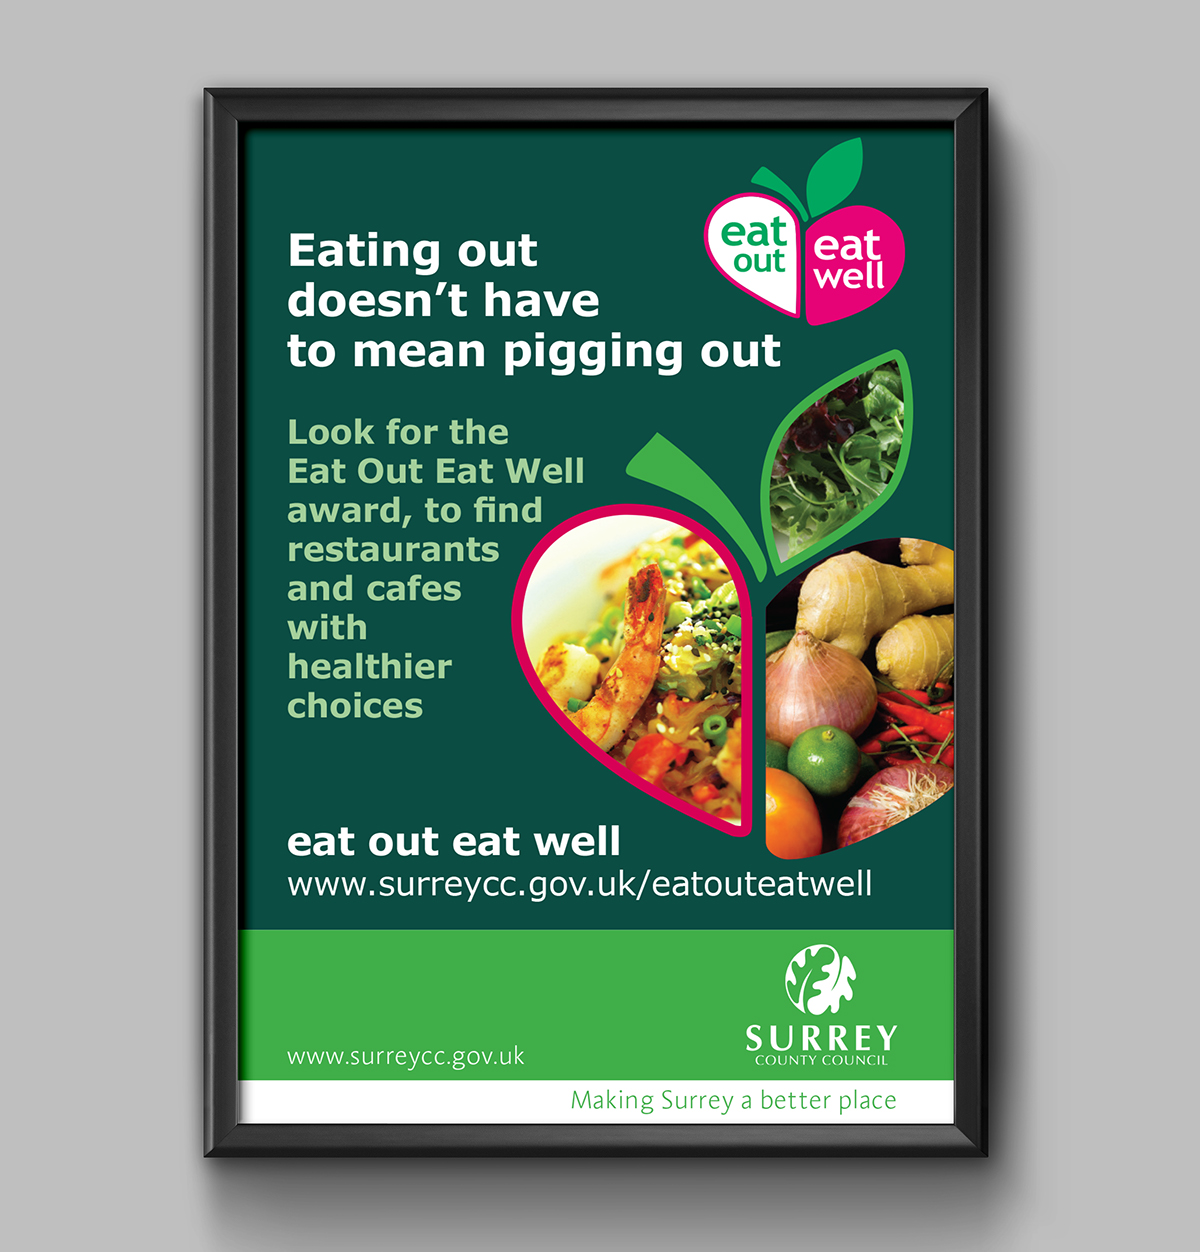 healthy eating branding identity Surrey County Council